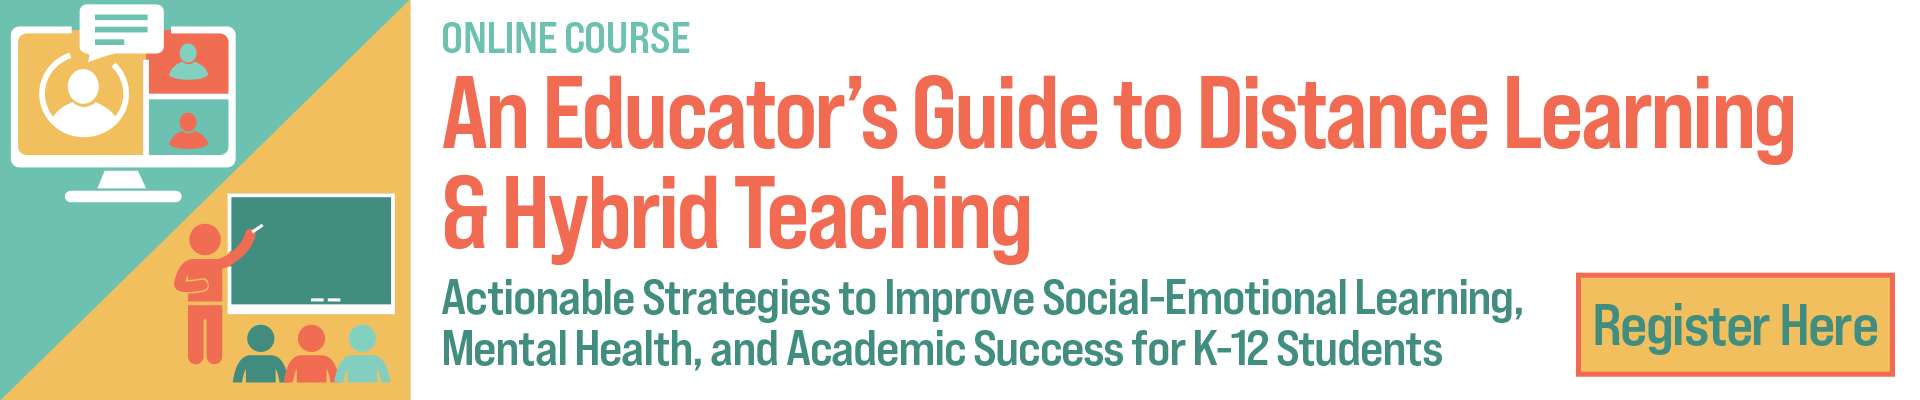 An Educator’s Guide to Distance Learning & Hybrid Teaching: Actionable Strategies to Improve Social-Emotional Learning, Mental Health, and Academic Success for K-12 Students